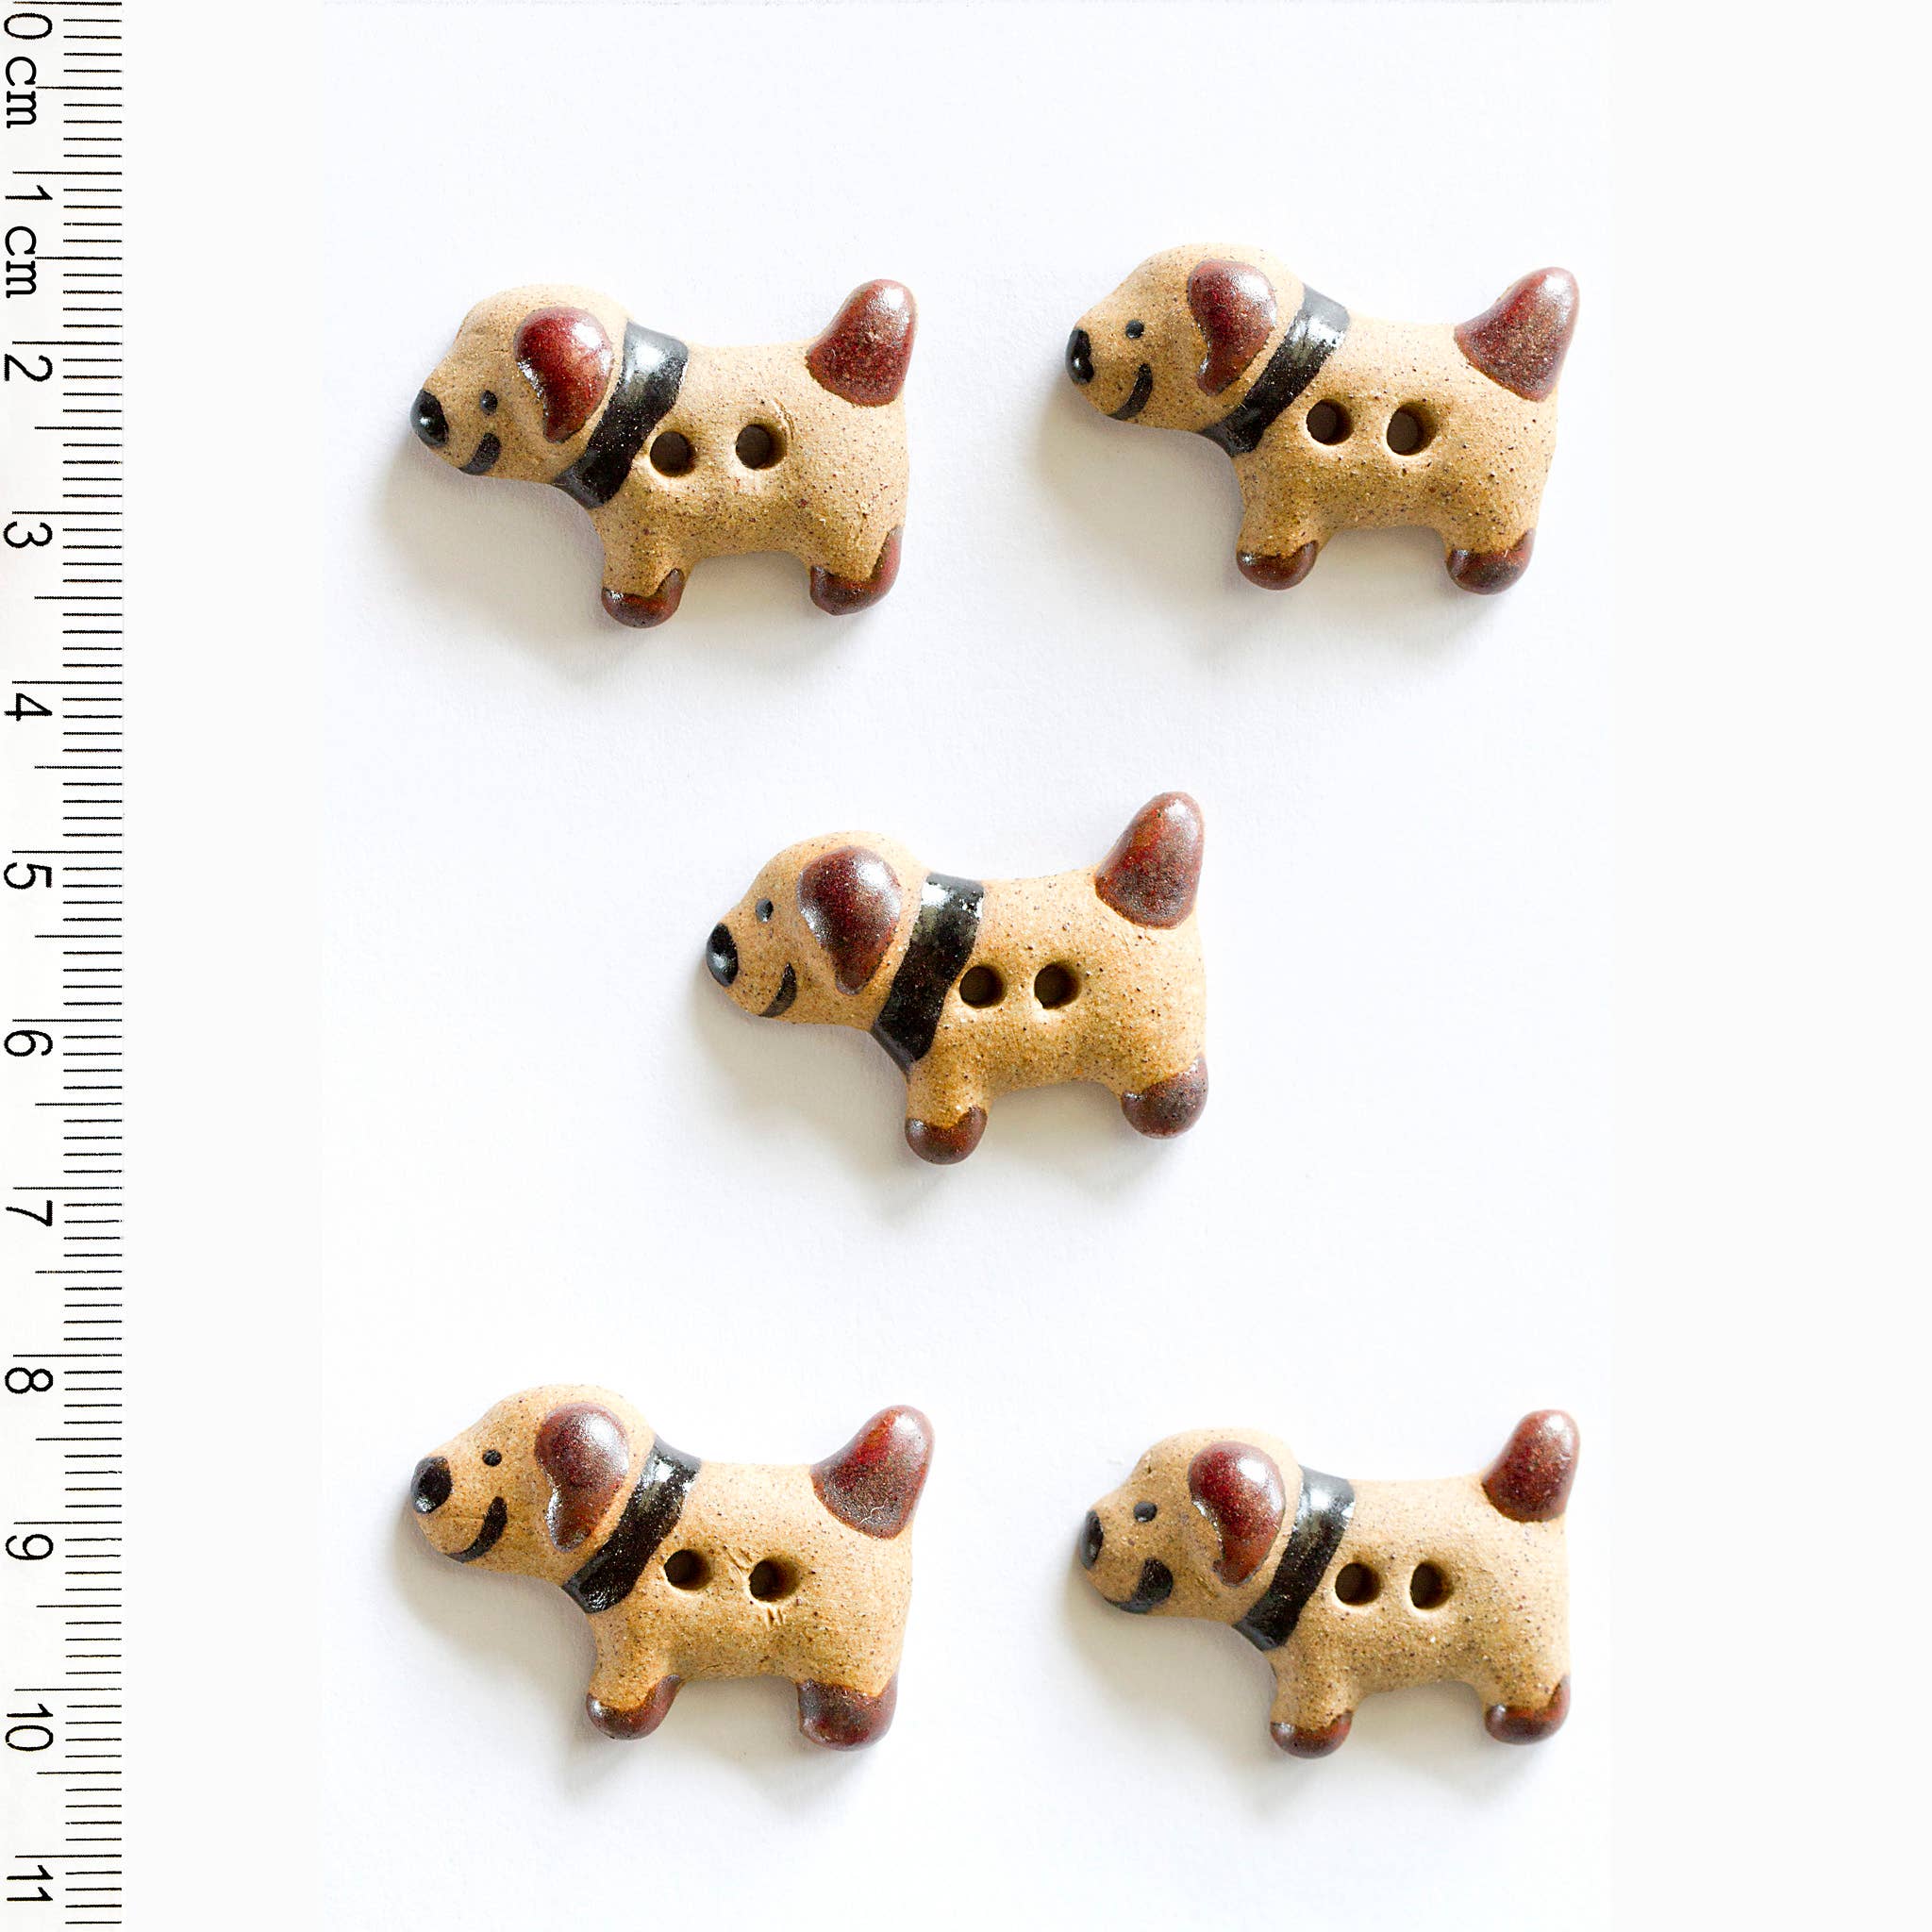 Incomparable Buttons - 5 Puppy Dog Buttons